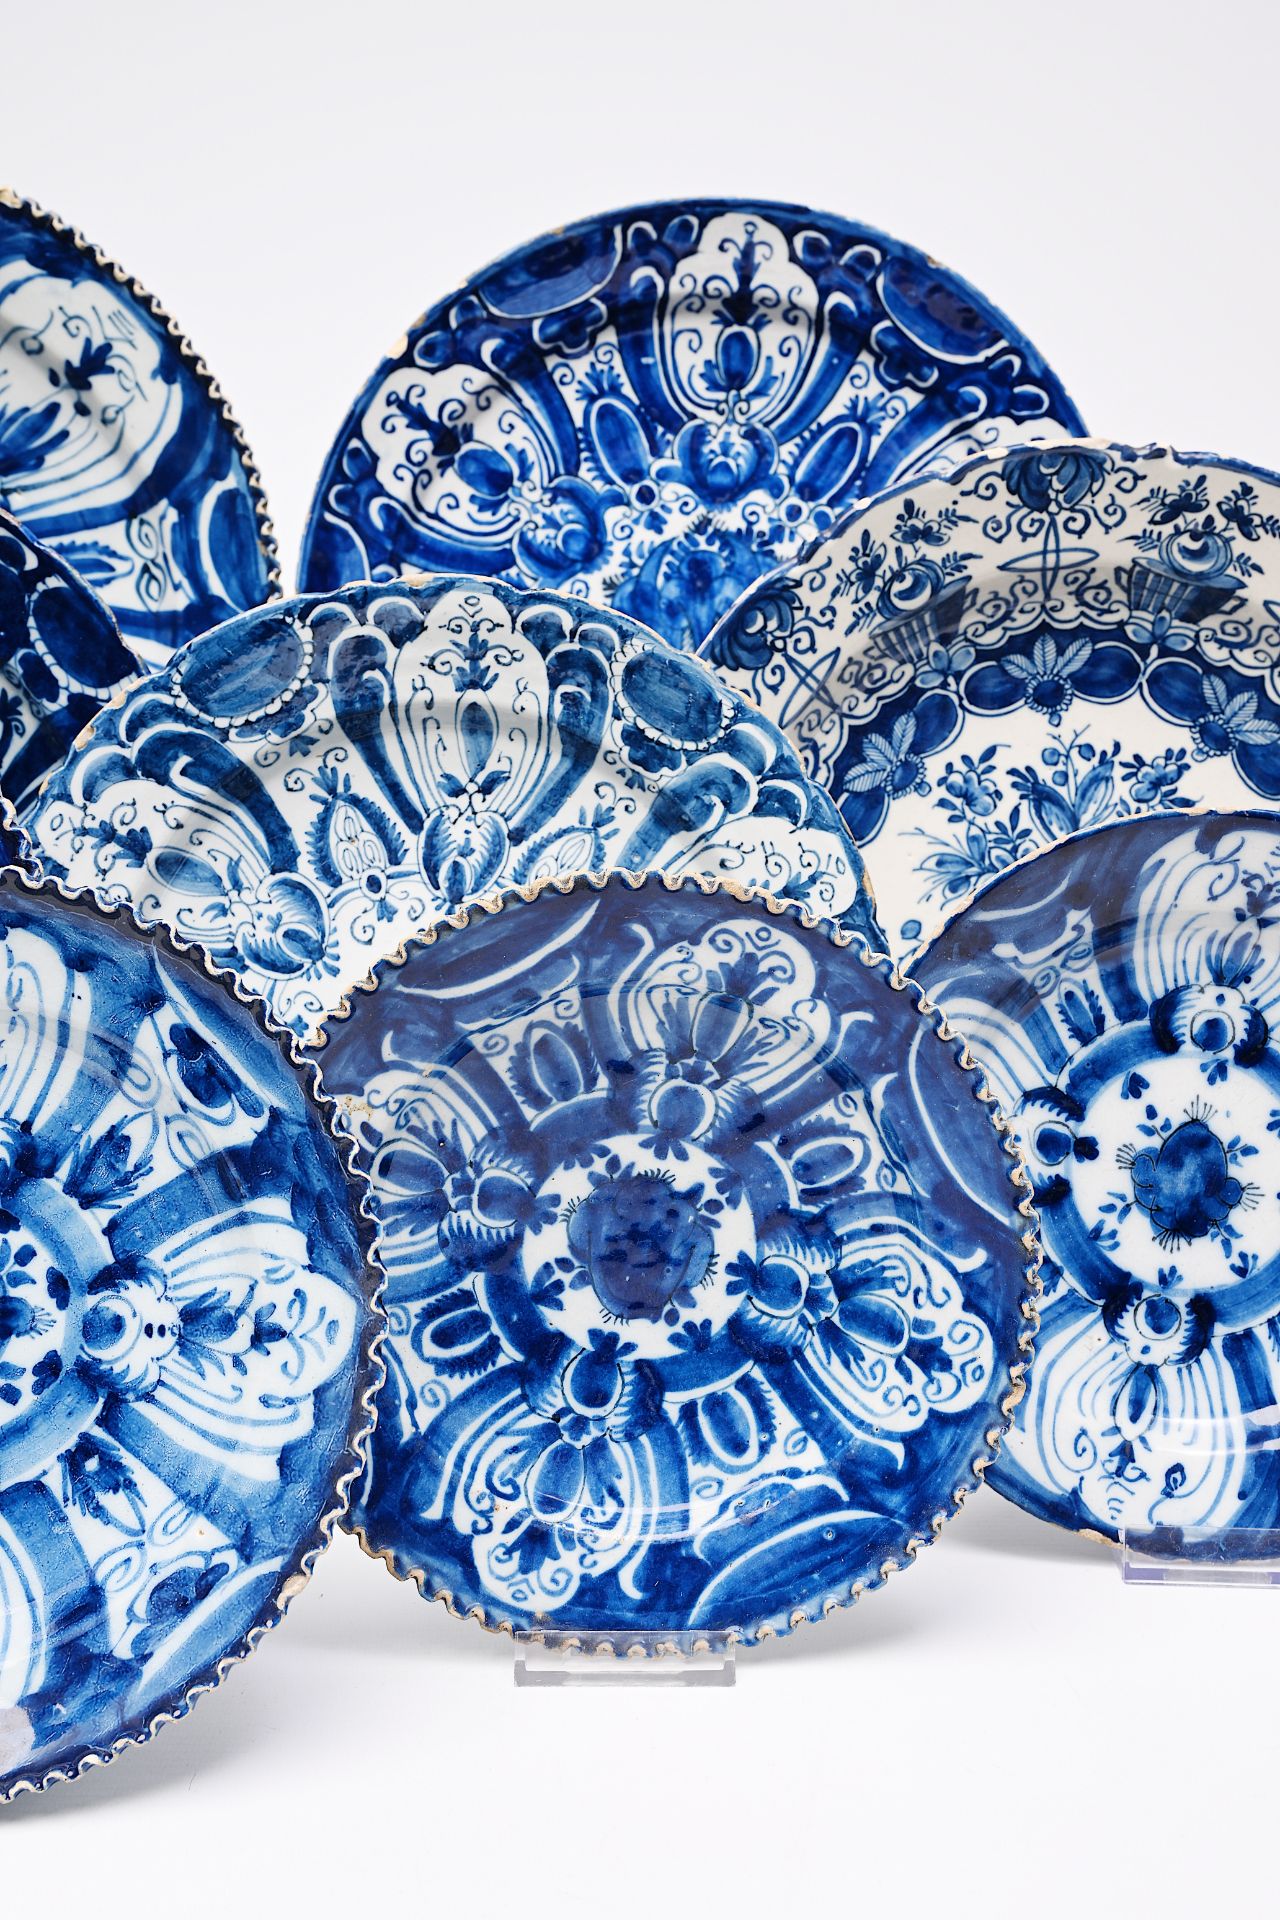 A varied collection of Dutch Delft blue and white plates and dishes with floral design, 18th C. - Image 3 of 8